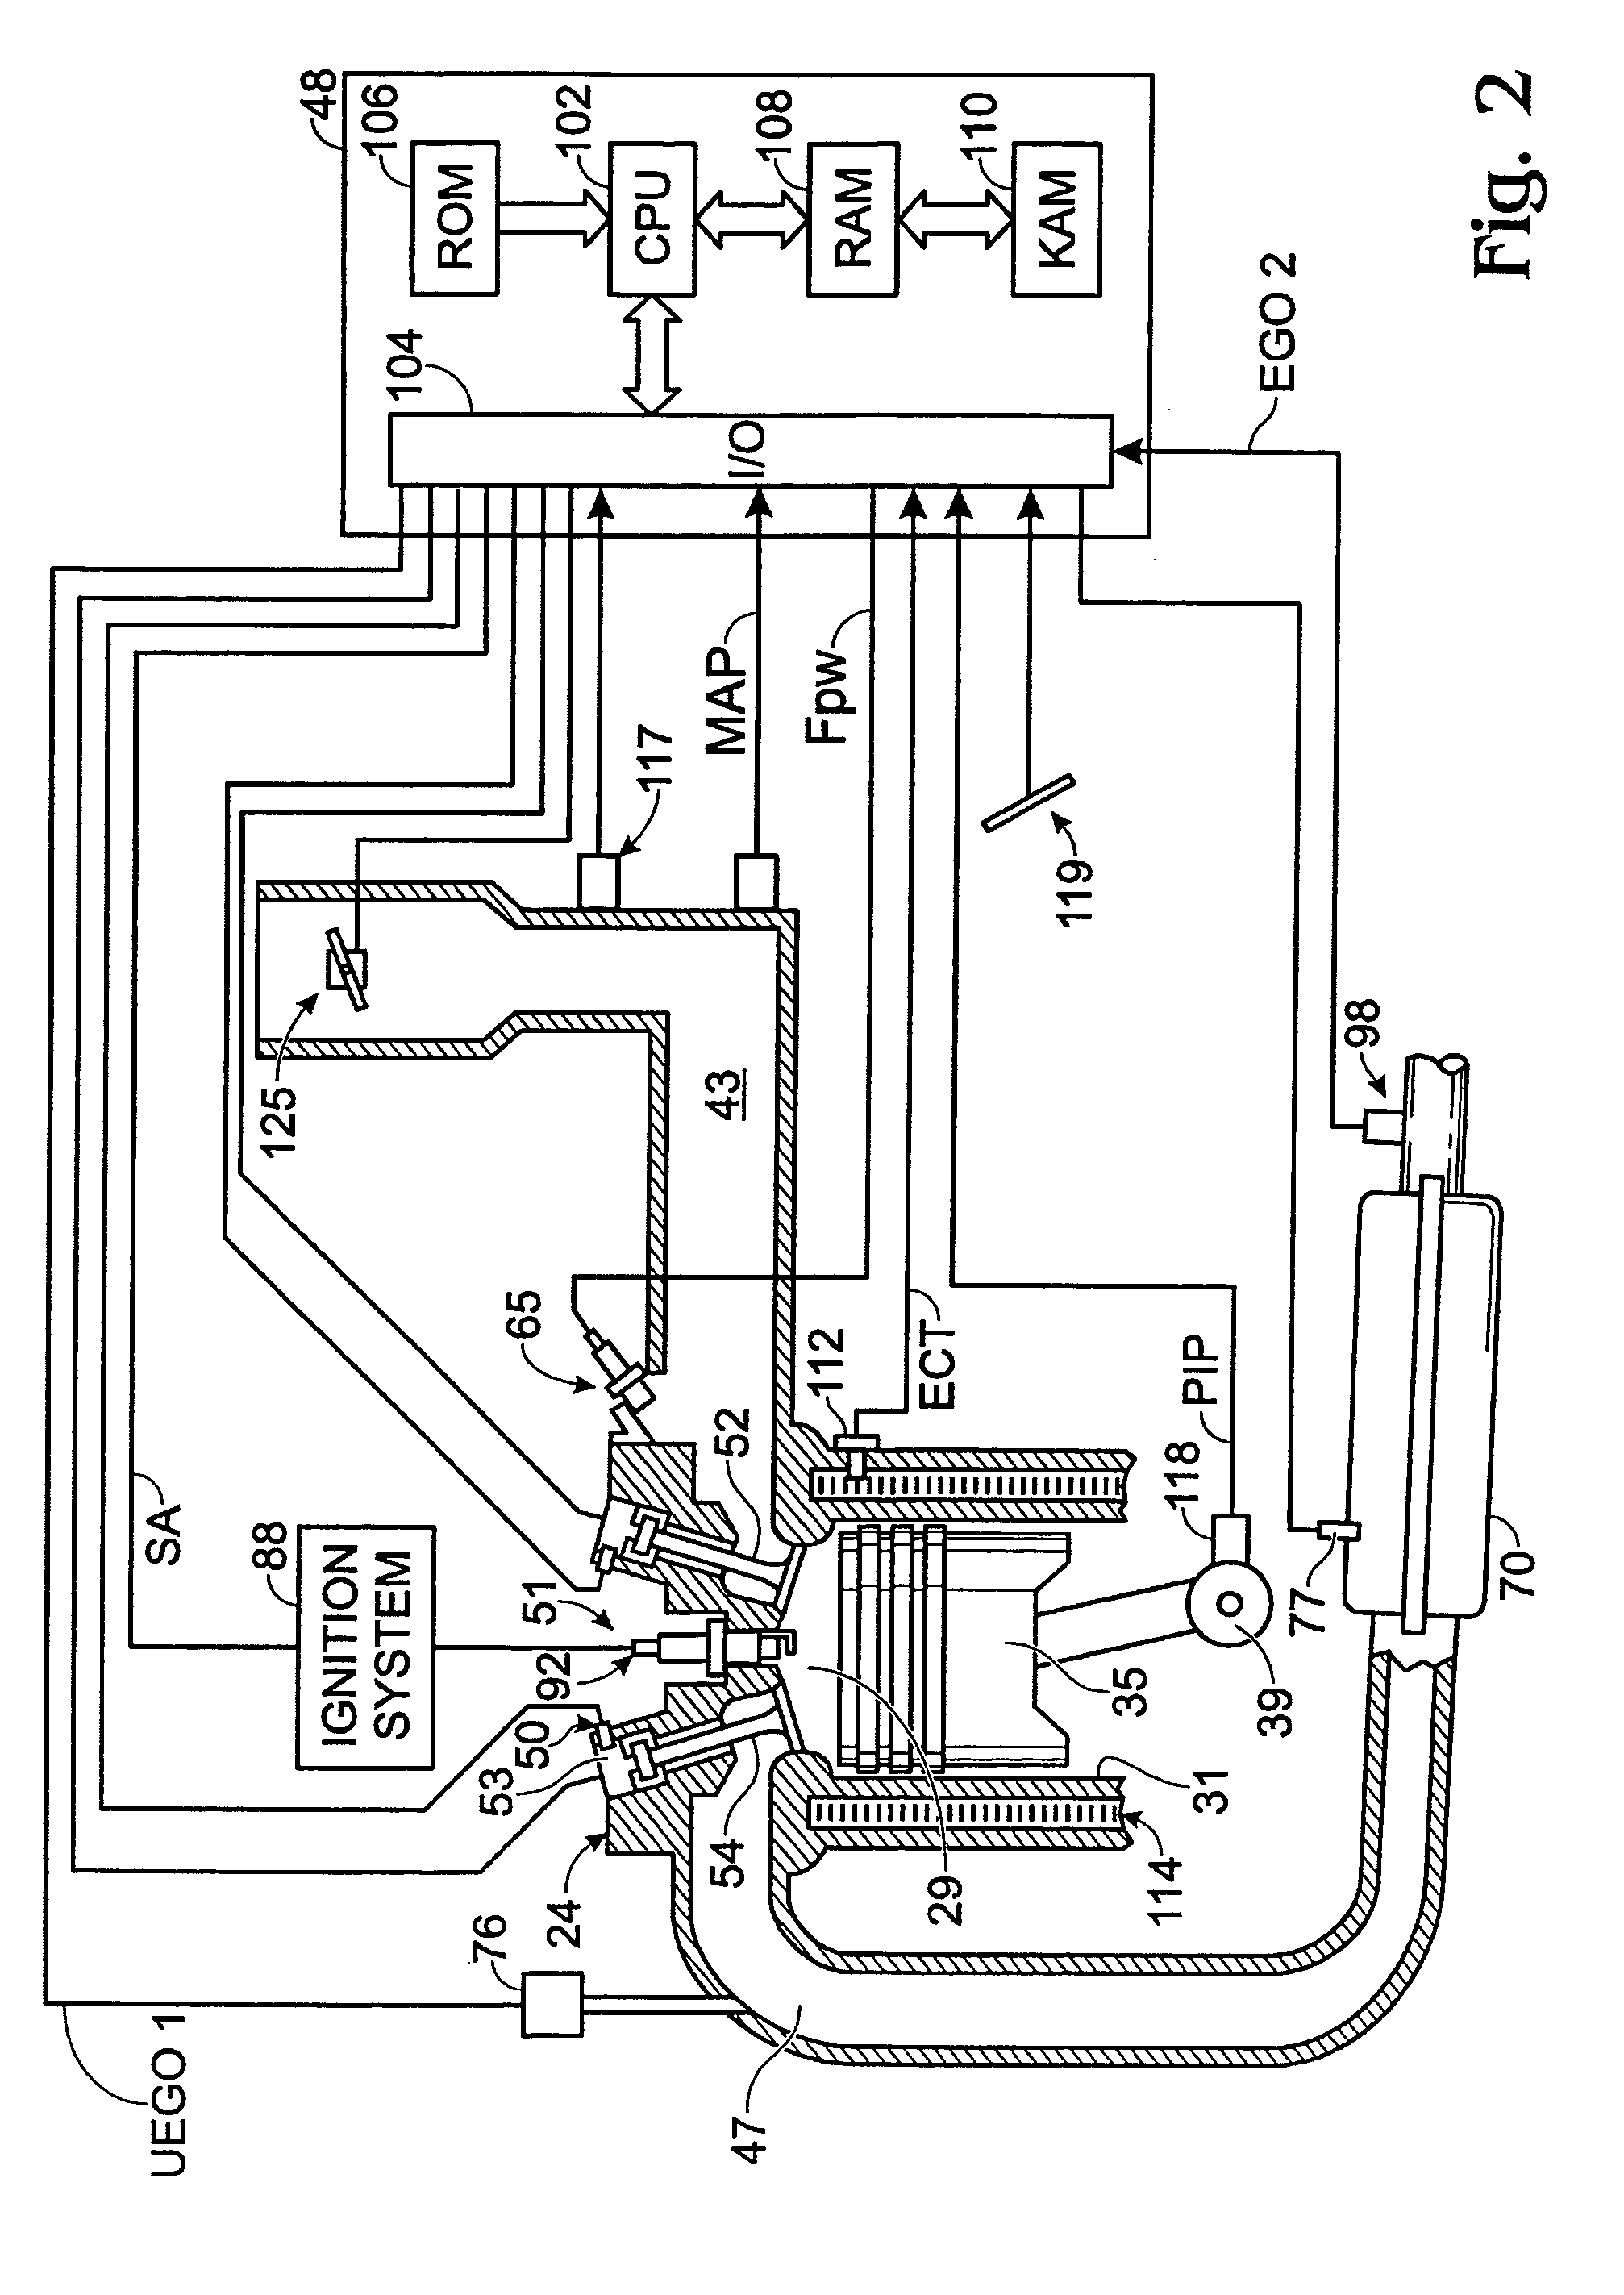 System and method to control engine during de-sulphurization operation in a hybrid vehicle